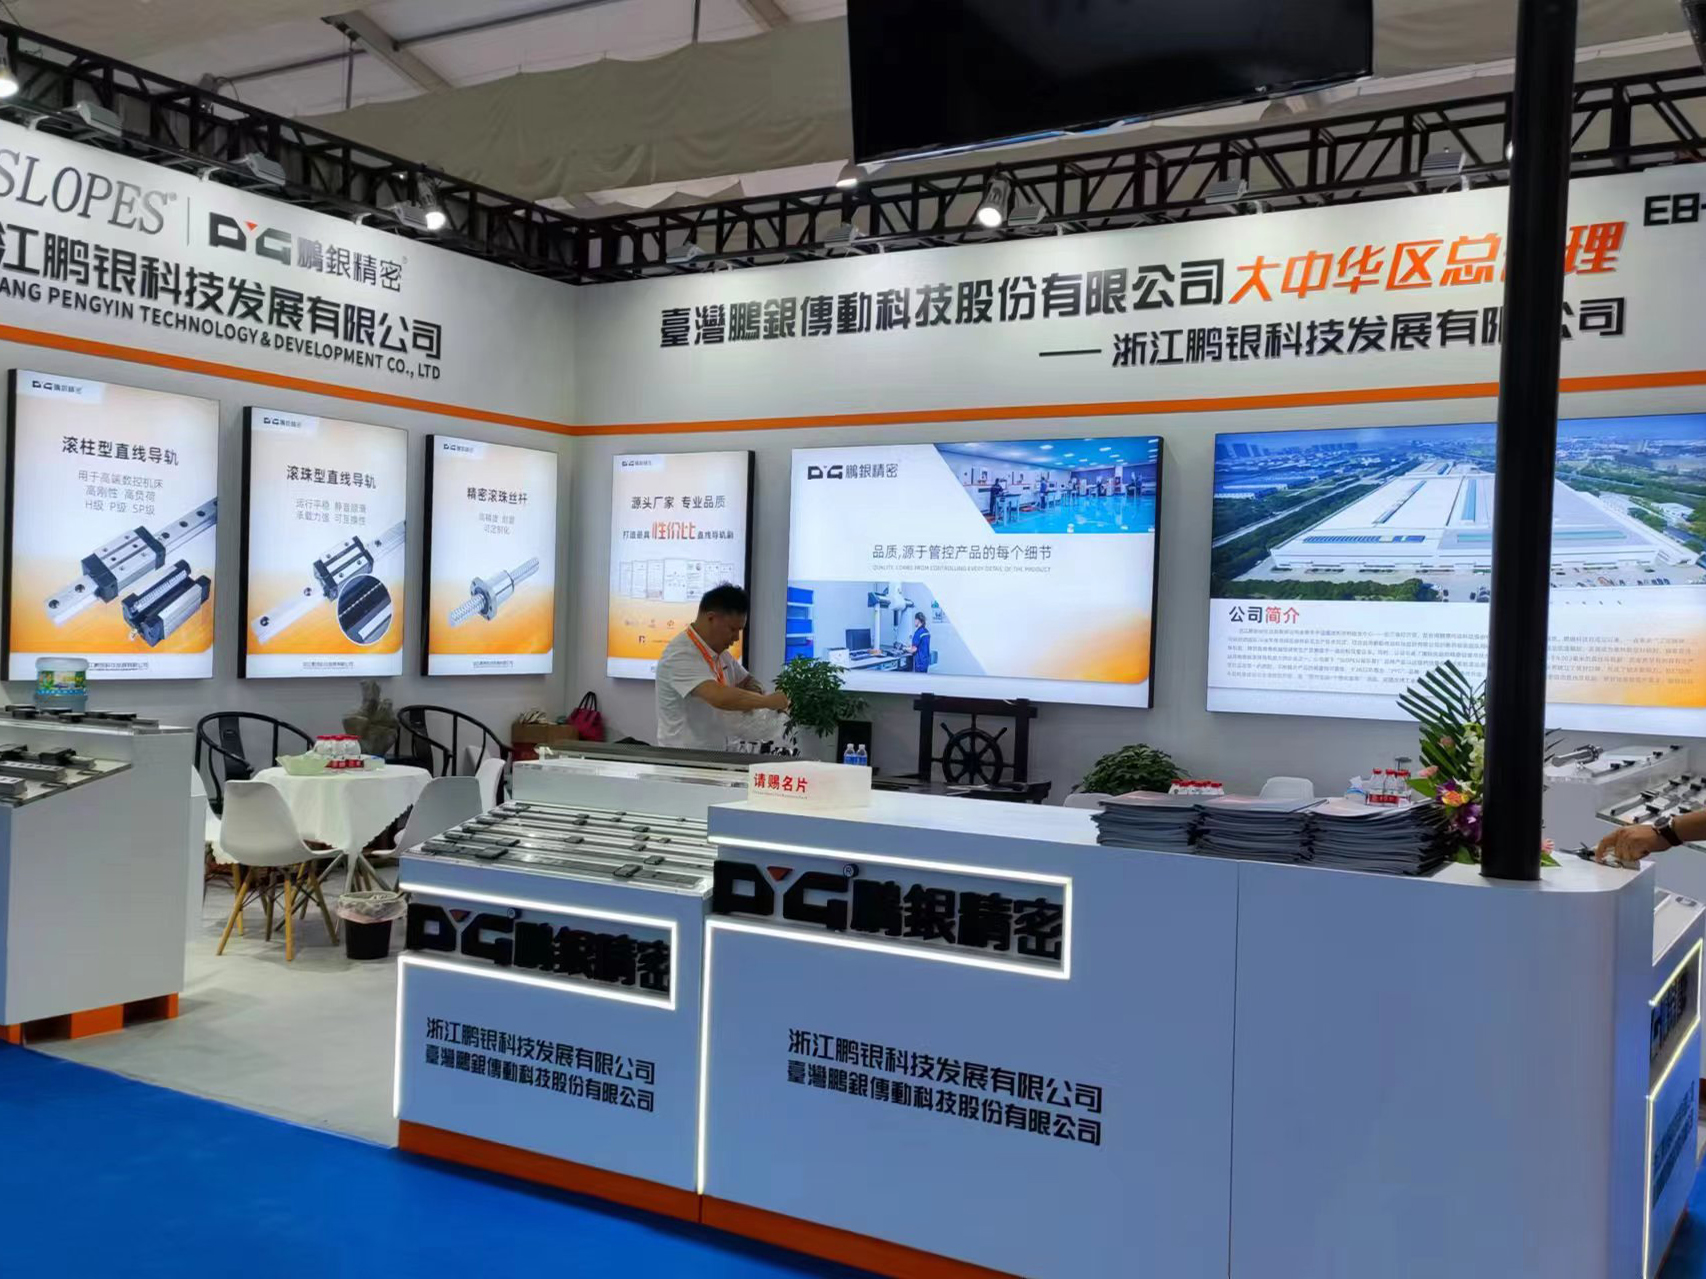 16th International Photovoltaic Power Generation and Smart Energy Exhibition